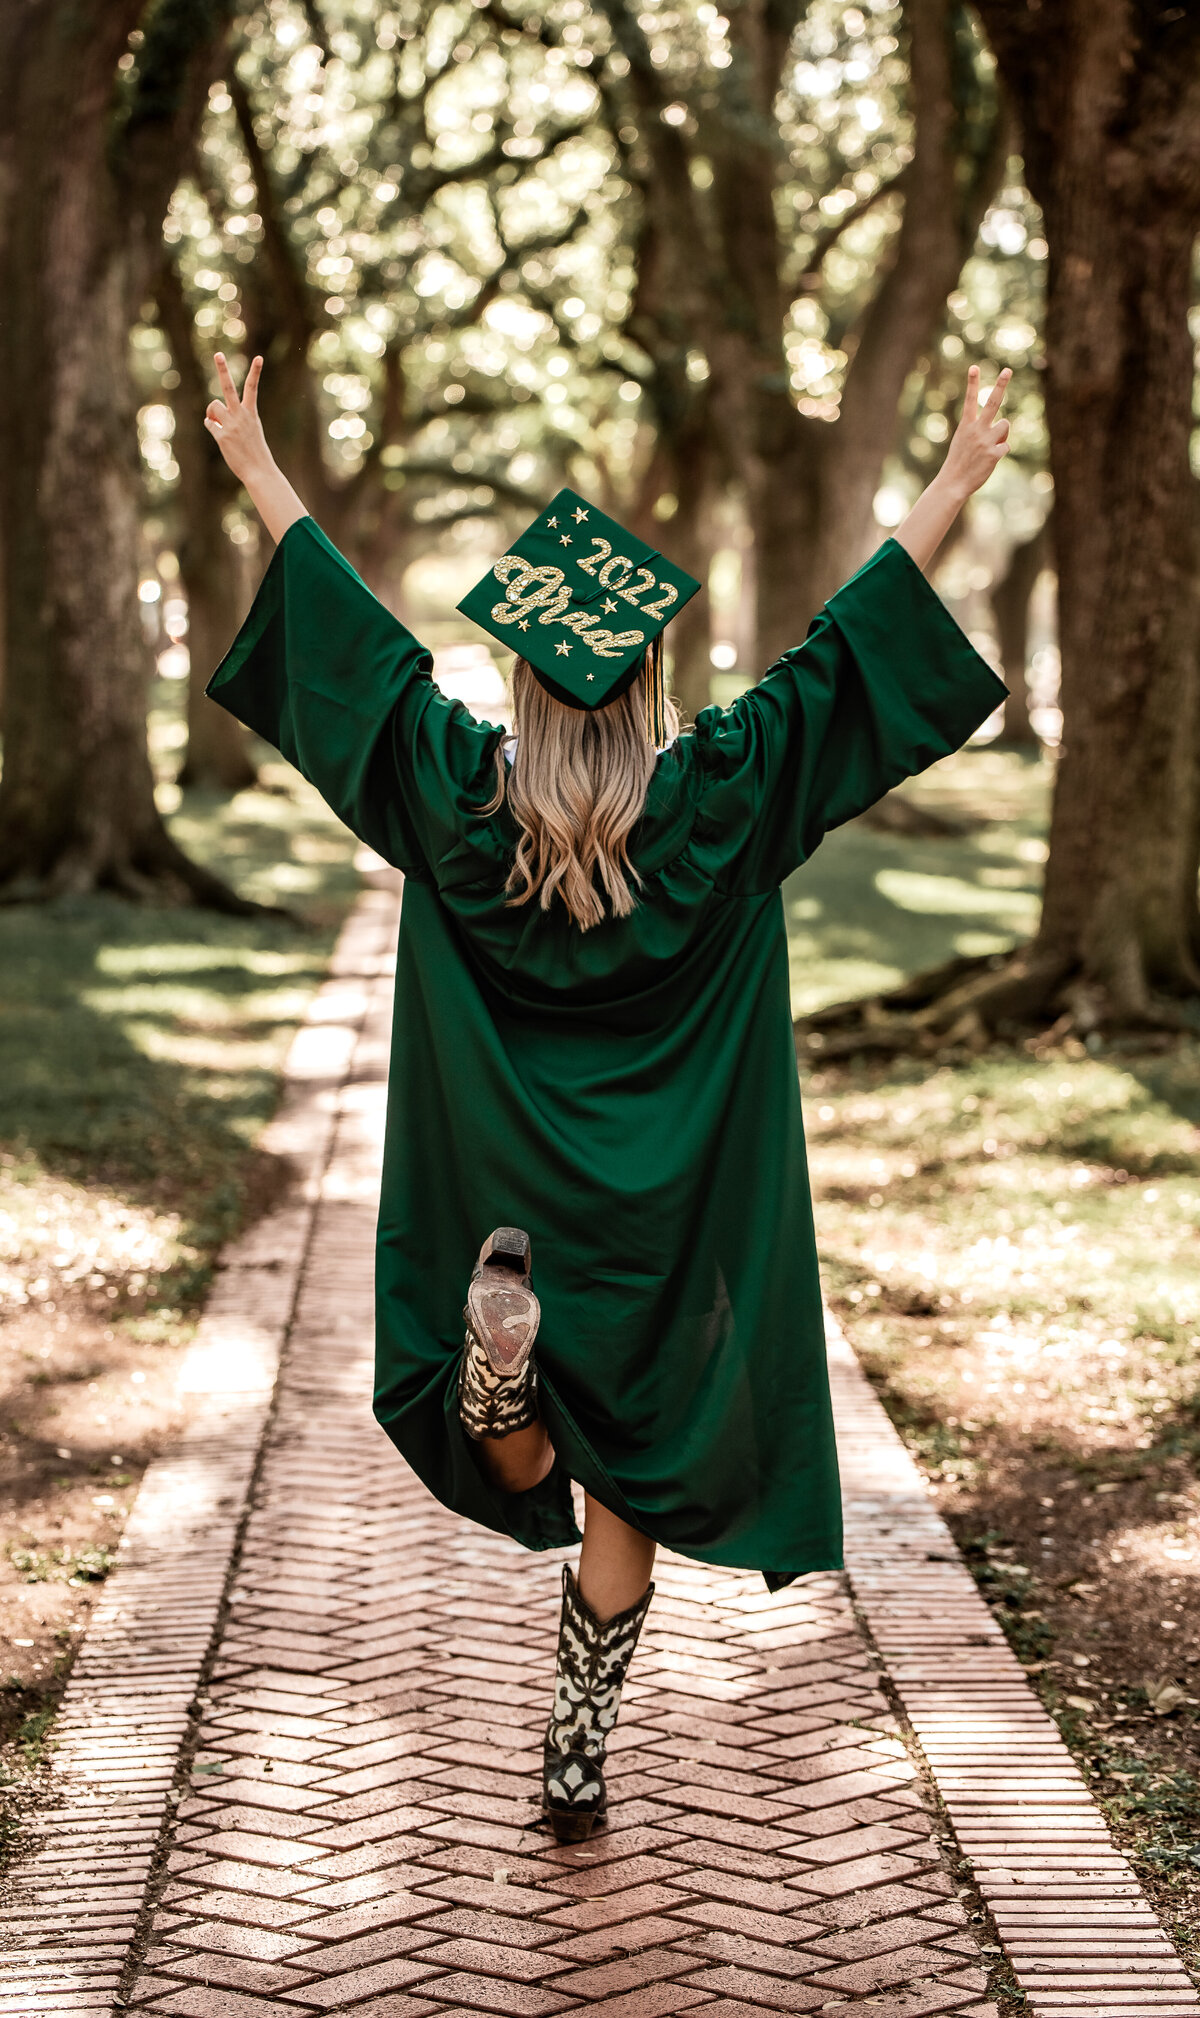 A senior wearing a green cap and gown holding her fingers in the air to read "22".